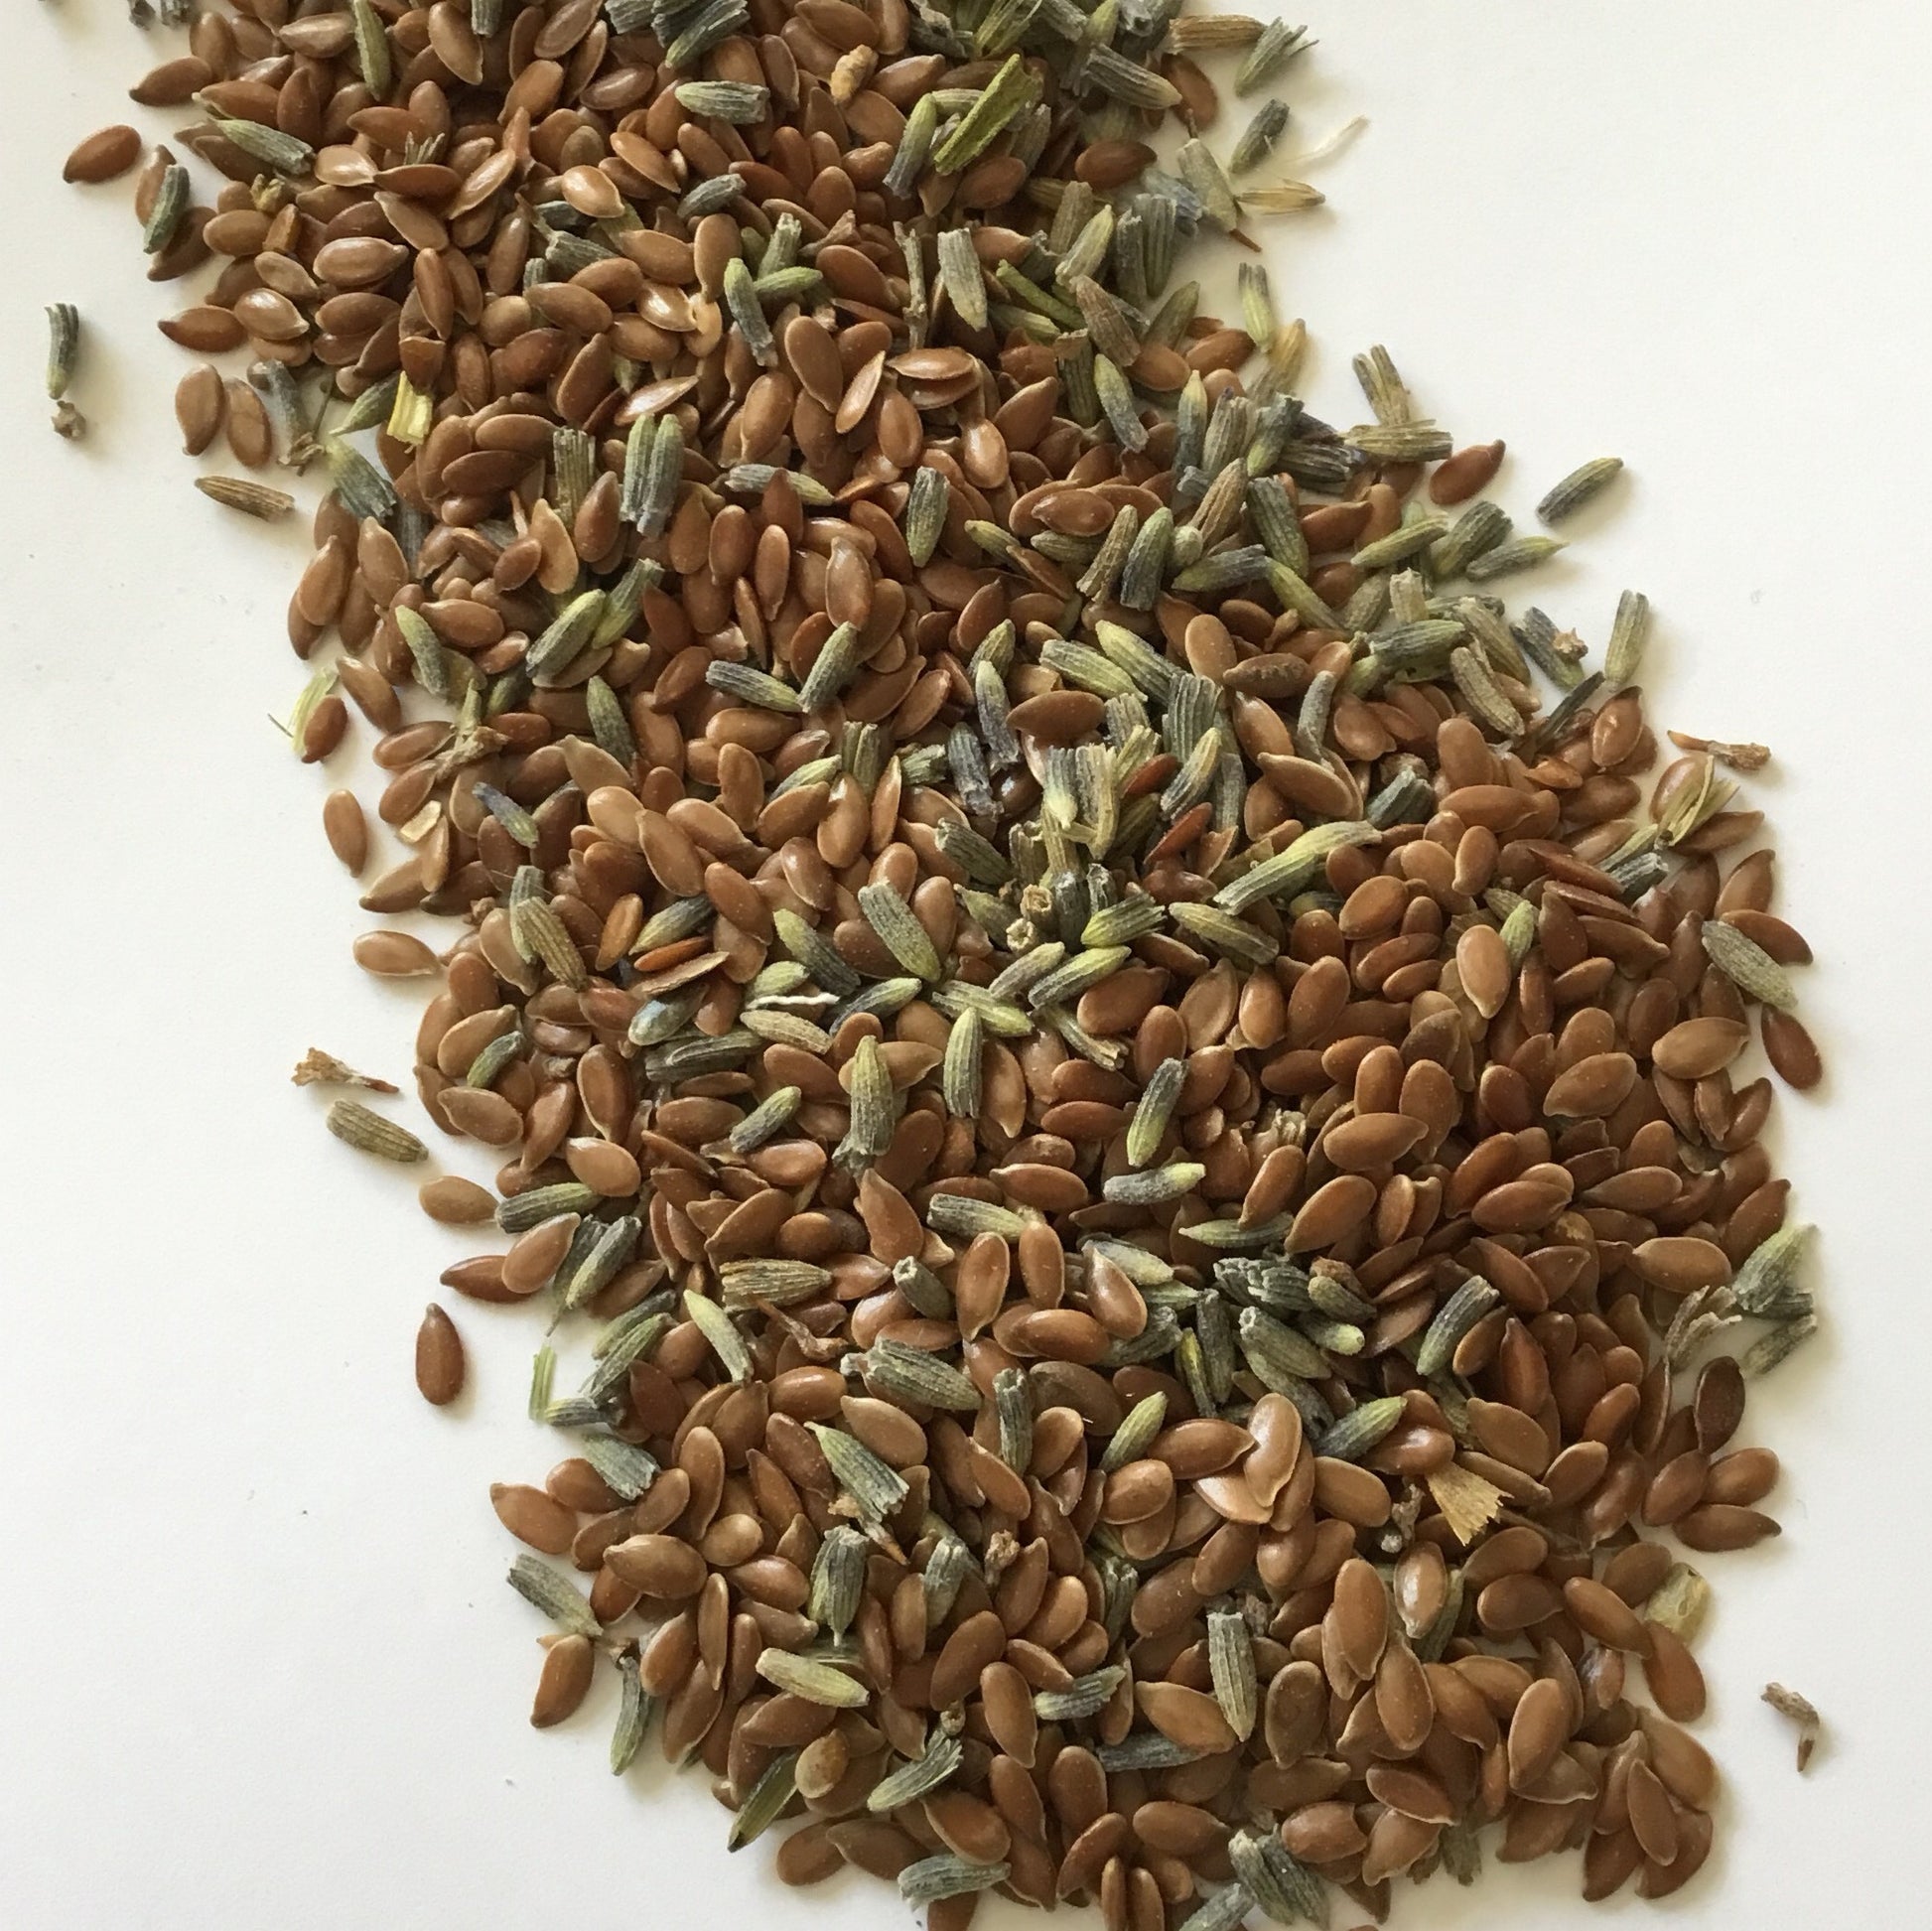 flaxseed and English lavender filling used for WheatBagHeaven eye pillows and sleep masks in a range of beautiful fabrics 